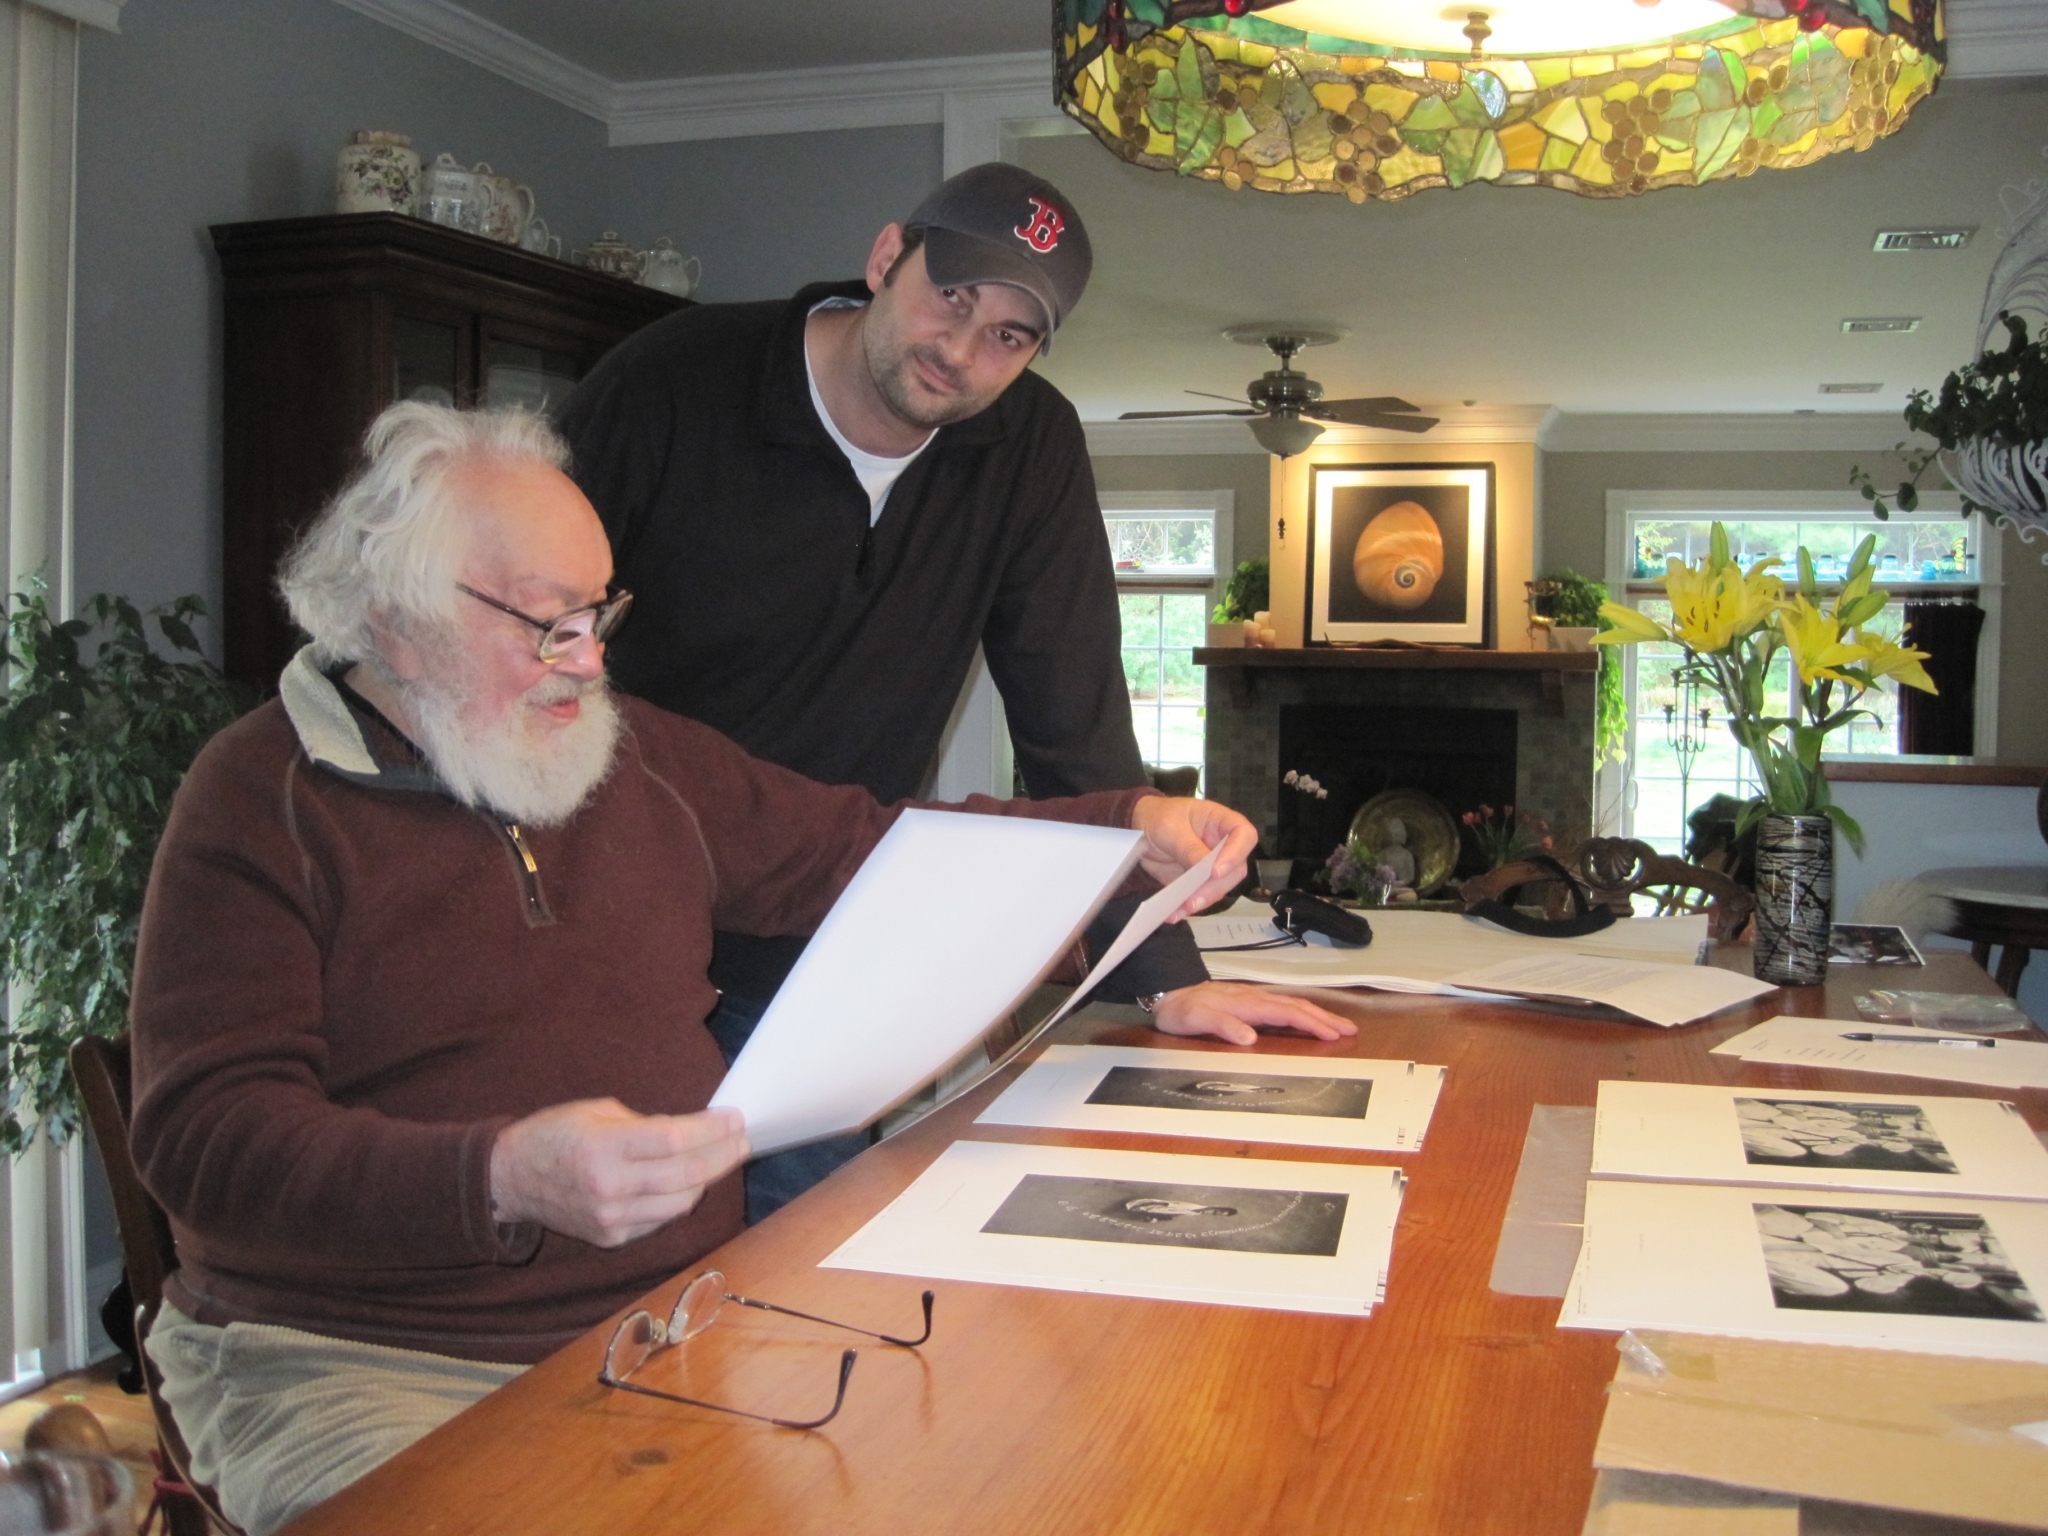 Harold commenting on photos from his Retrospective book with Jason Landry in May, 2012.